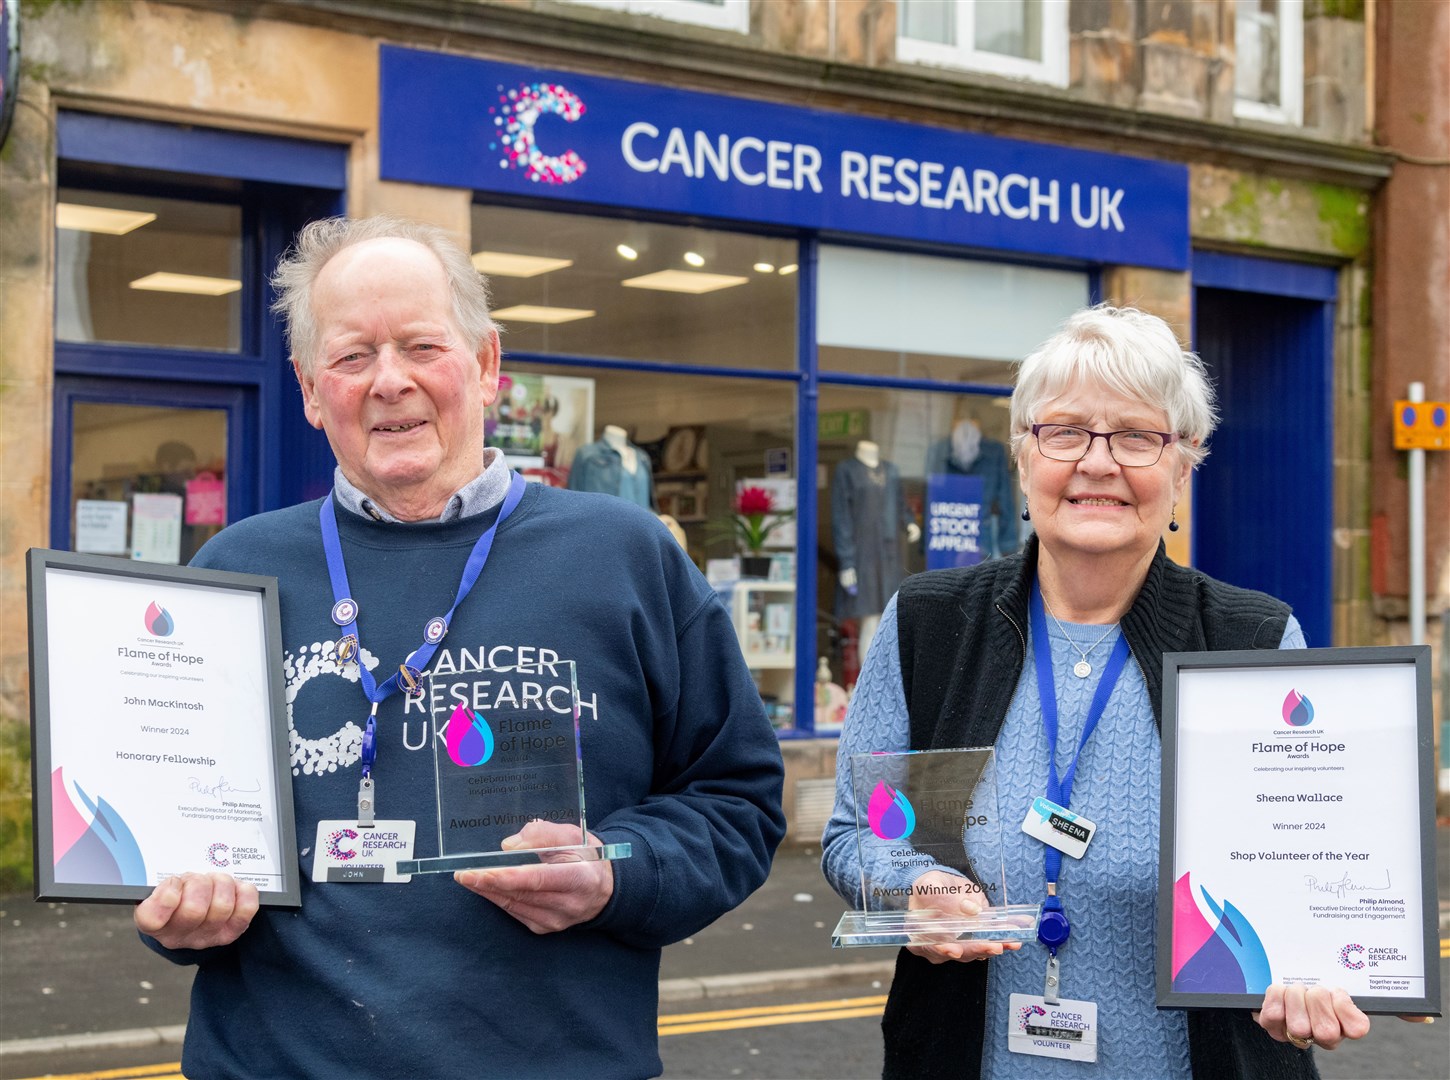 John MacKintosh and Sheena Wallace outside the Cancer Research UK Shop in Elgin. Picture: Beth Taylor